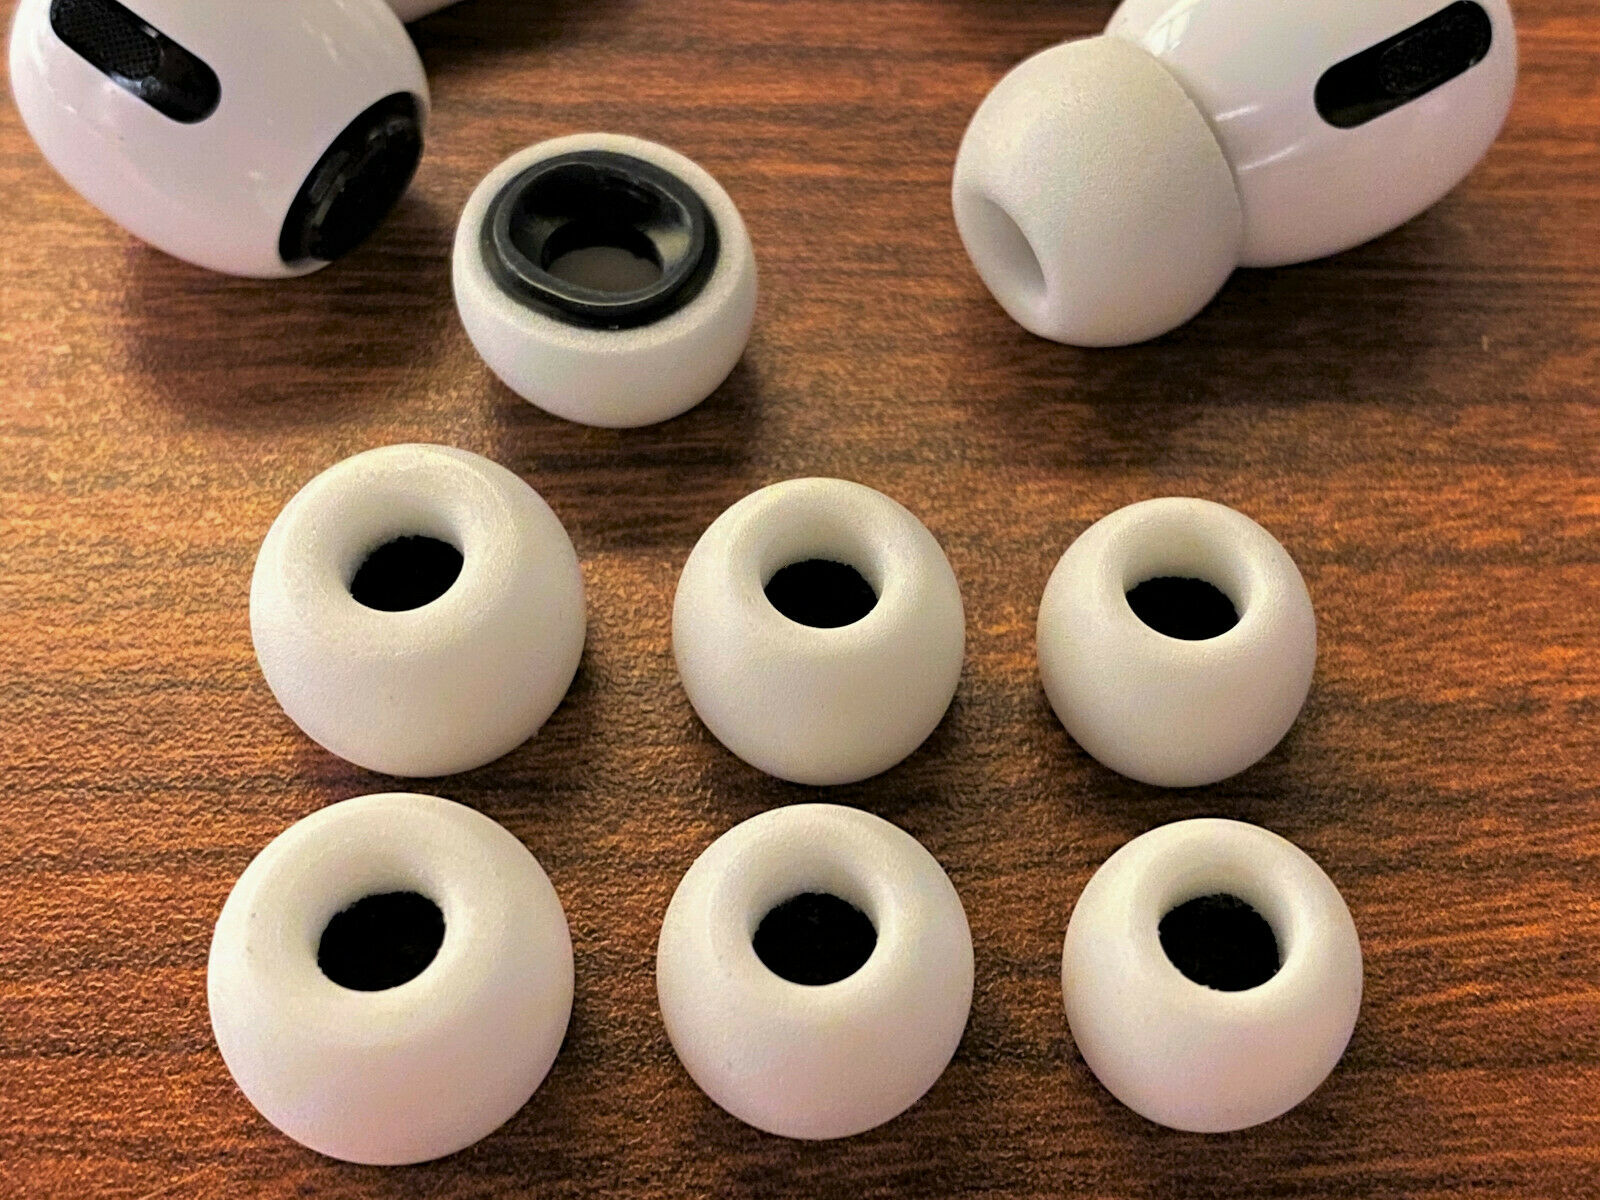 The Original!! Memory Foam Ear Tips For Apple Airpods Pro Buds White